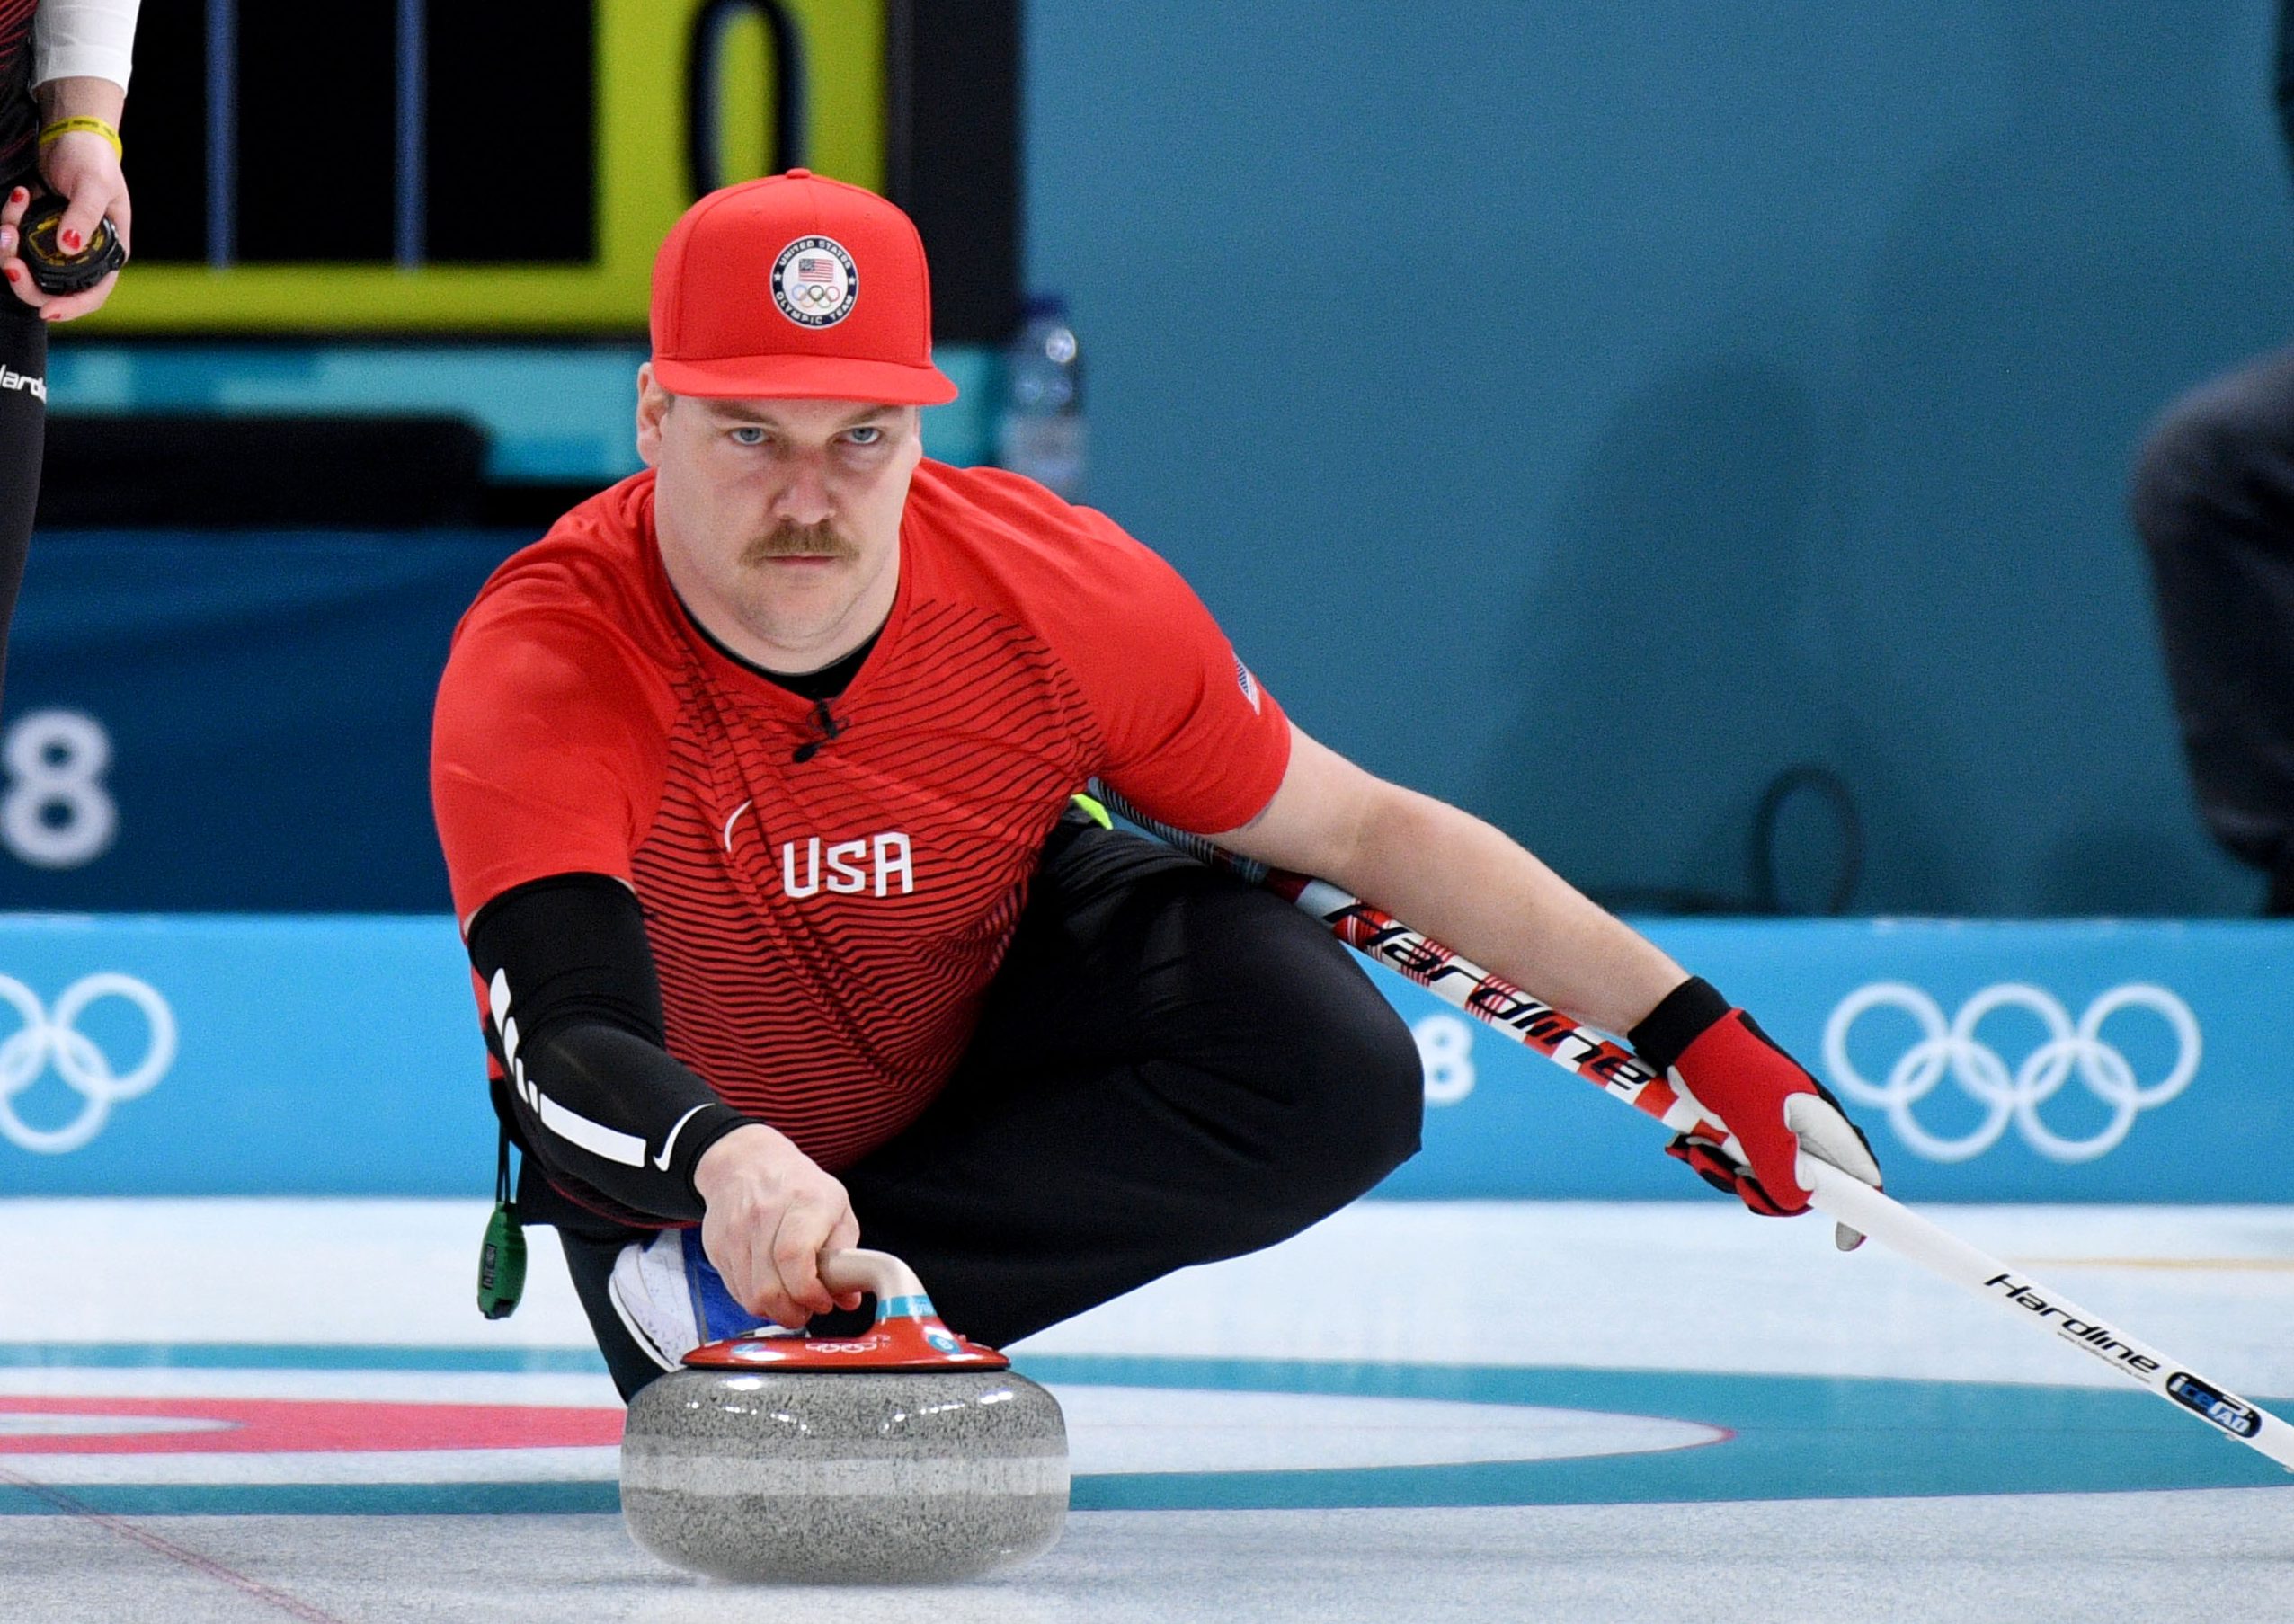 Winter Olympics first big star is curler who looks like Super Mario